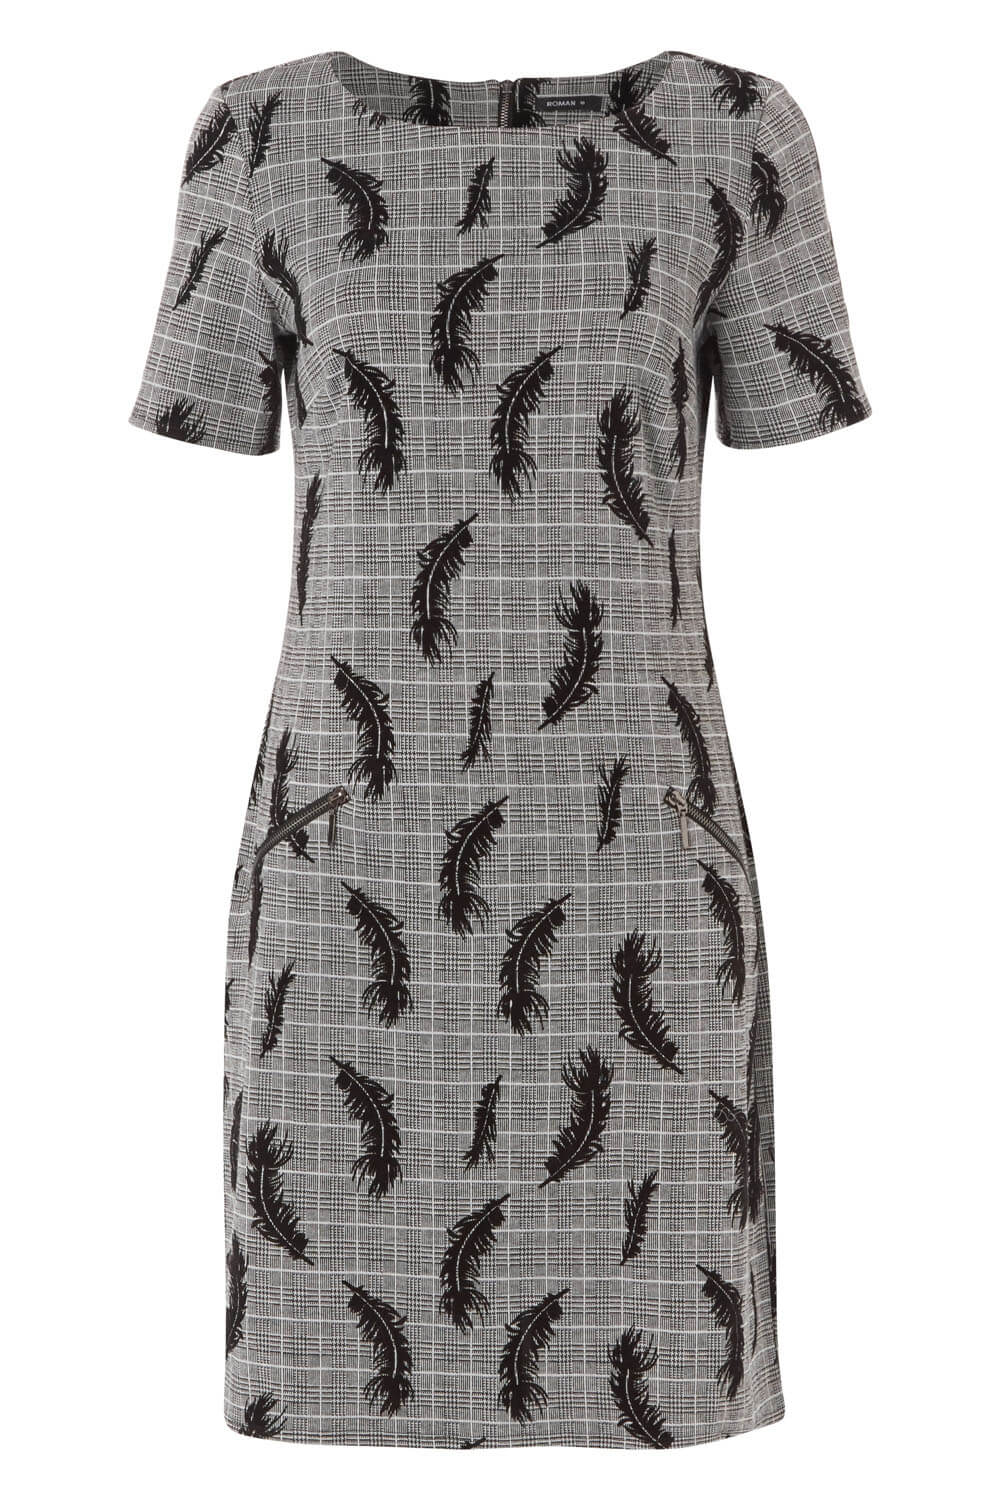 Grey Feather Checked Smart Shift Dress, Image 5 of 5